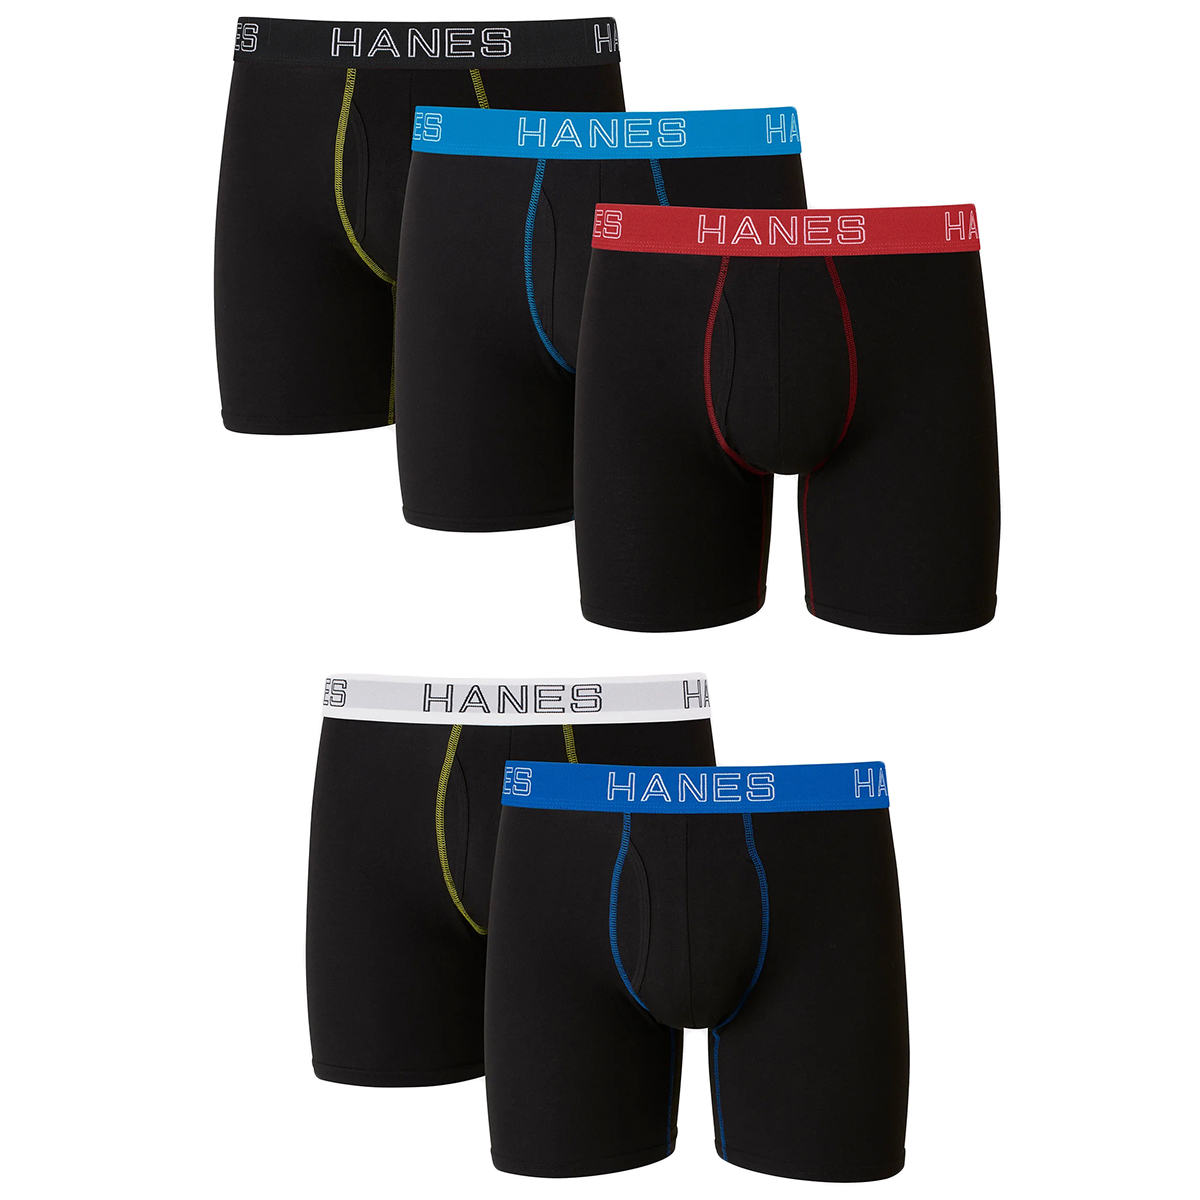 HANES Men's Ultimate Stretch Boxer Briefs, 5-Pack - Eastern Mountain Sports